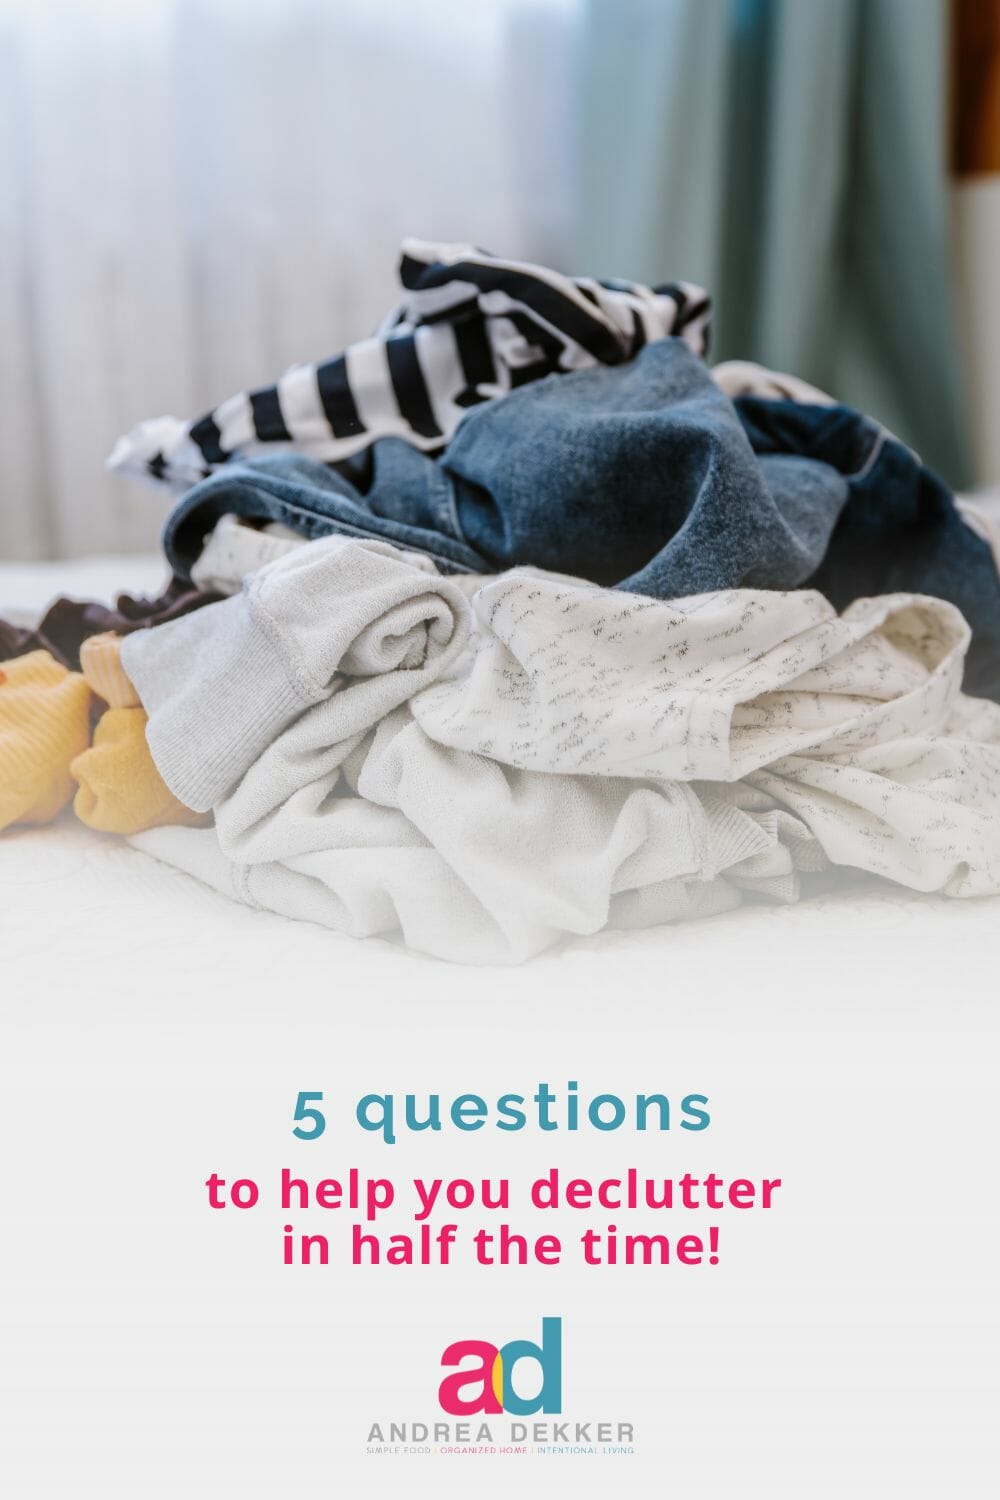 Are you tired of slogging through the decluttering process for every space in your home? Use these 5 simple questions to speed up the process and say goodbye to your clutter! via @andreadekker